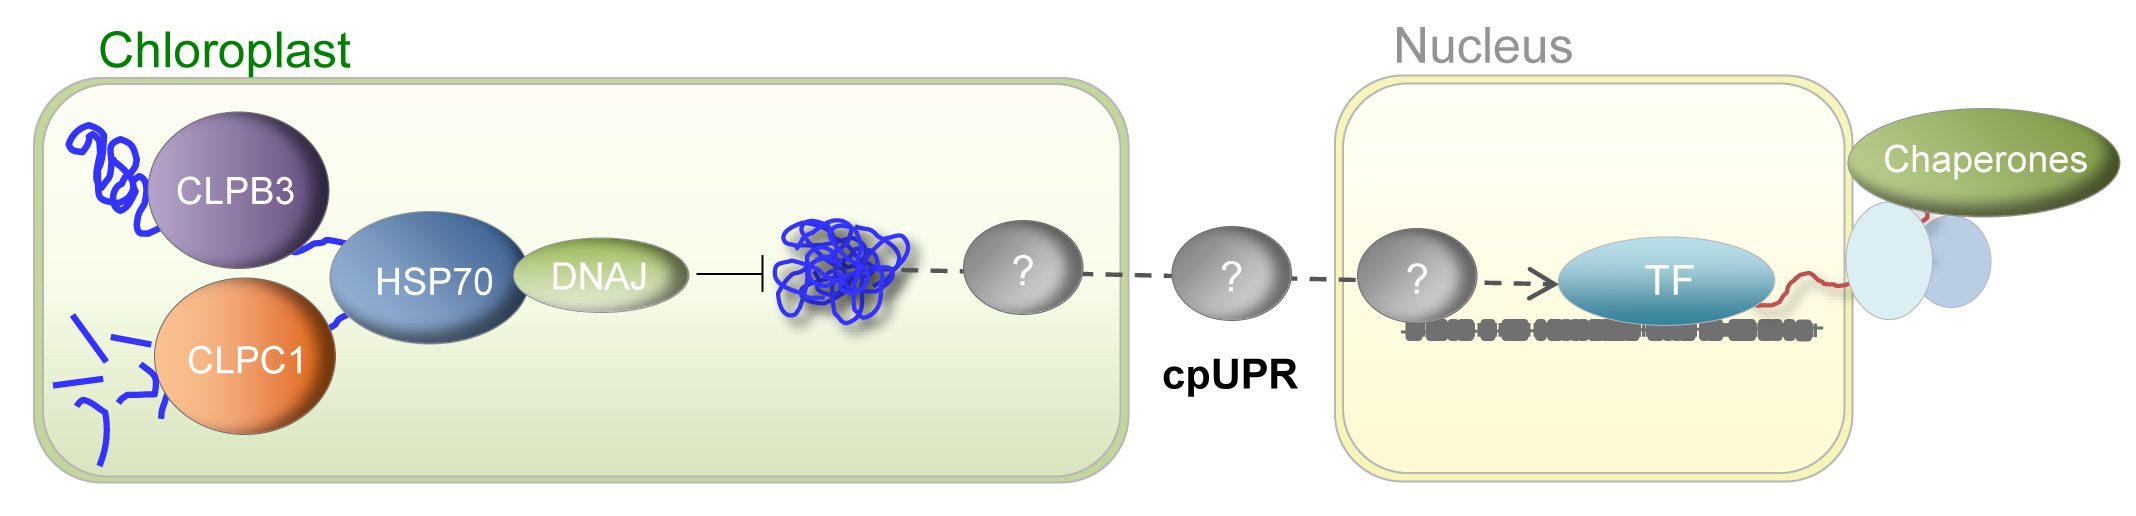 ResearchLineImage